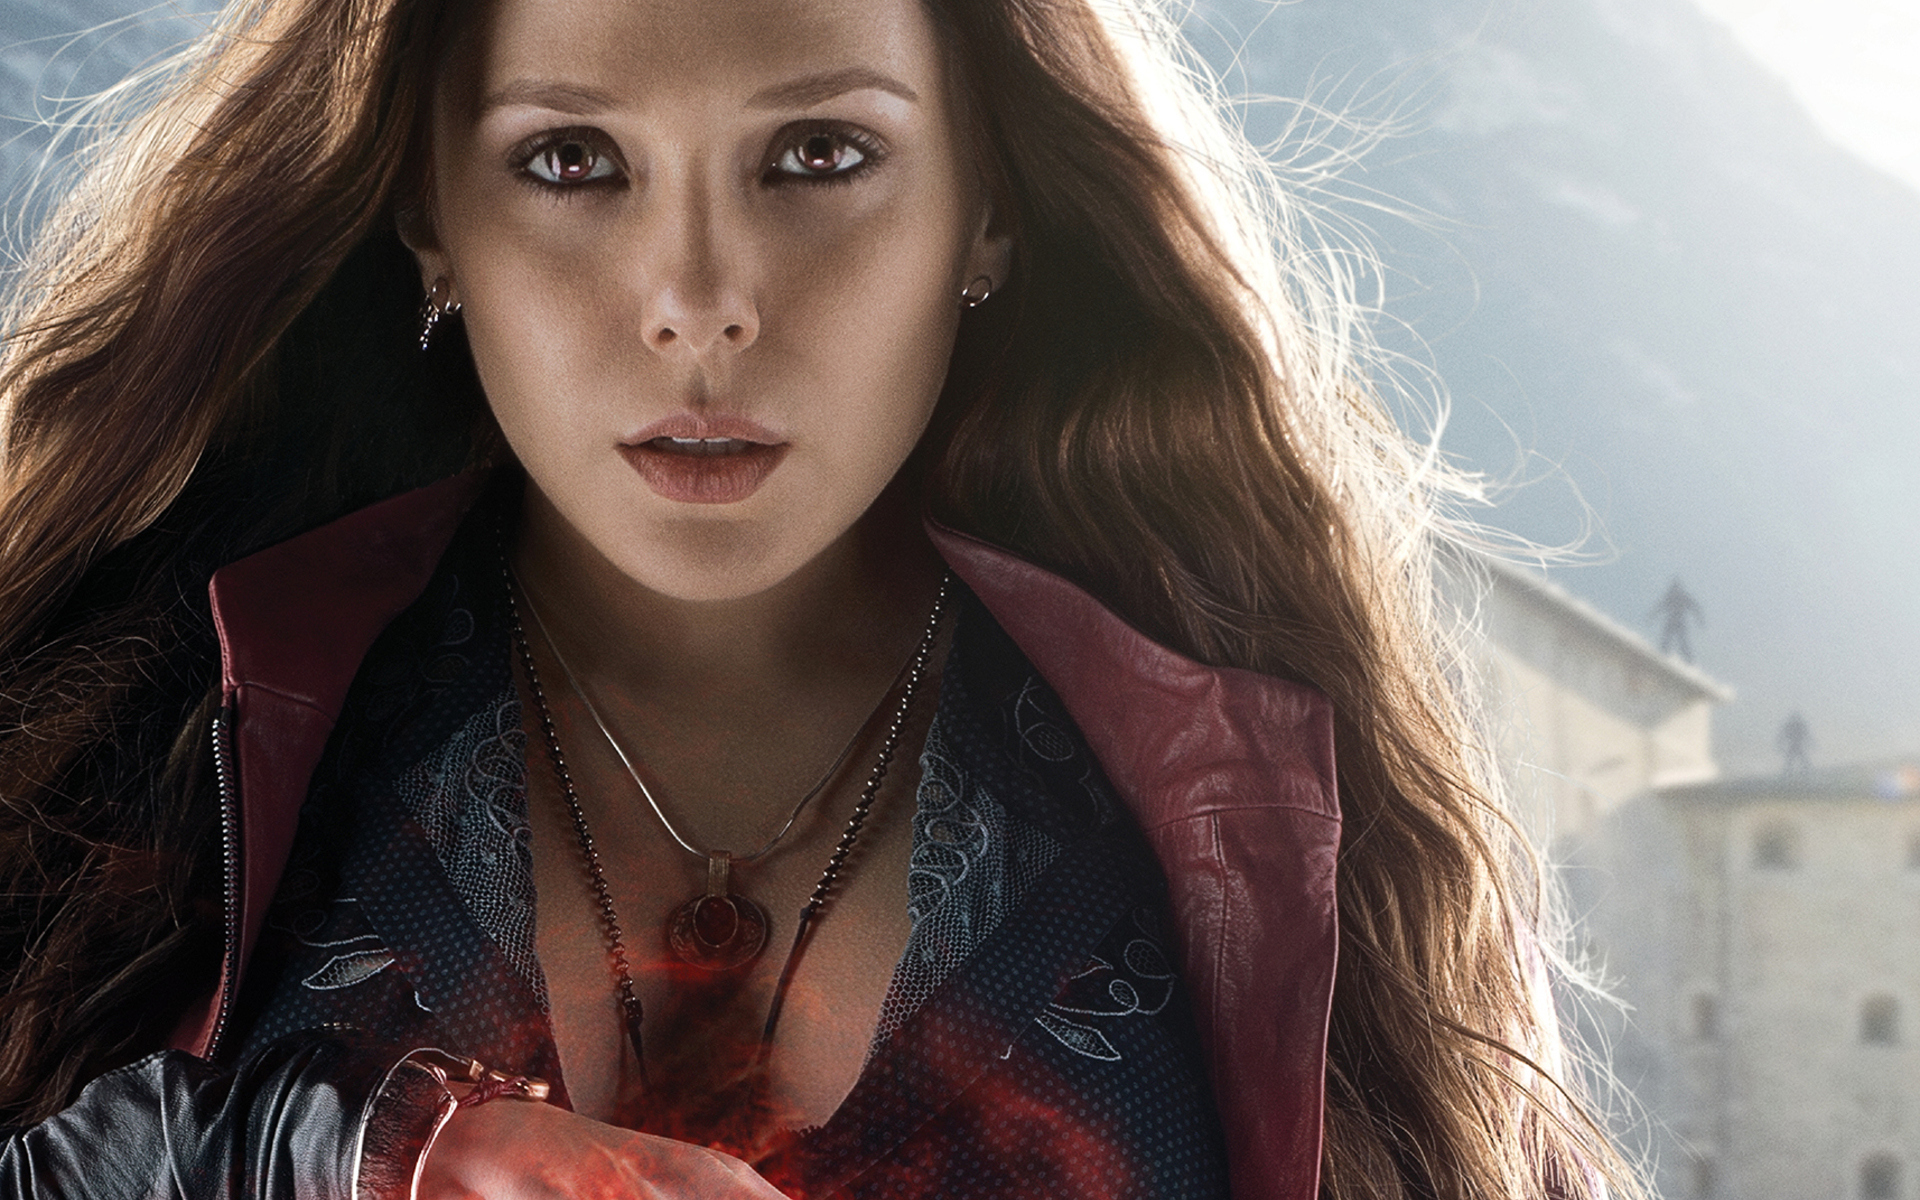 magic, earrings, movie, avengers: age of ultron, avengers, elizabeth olsen, long hair, necklace, red eyes, redhead, scarlet witch, the avengers